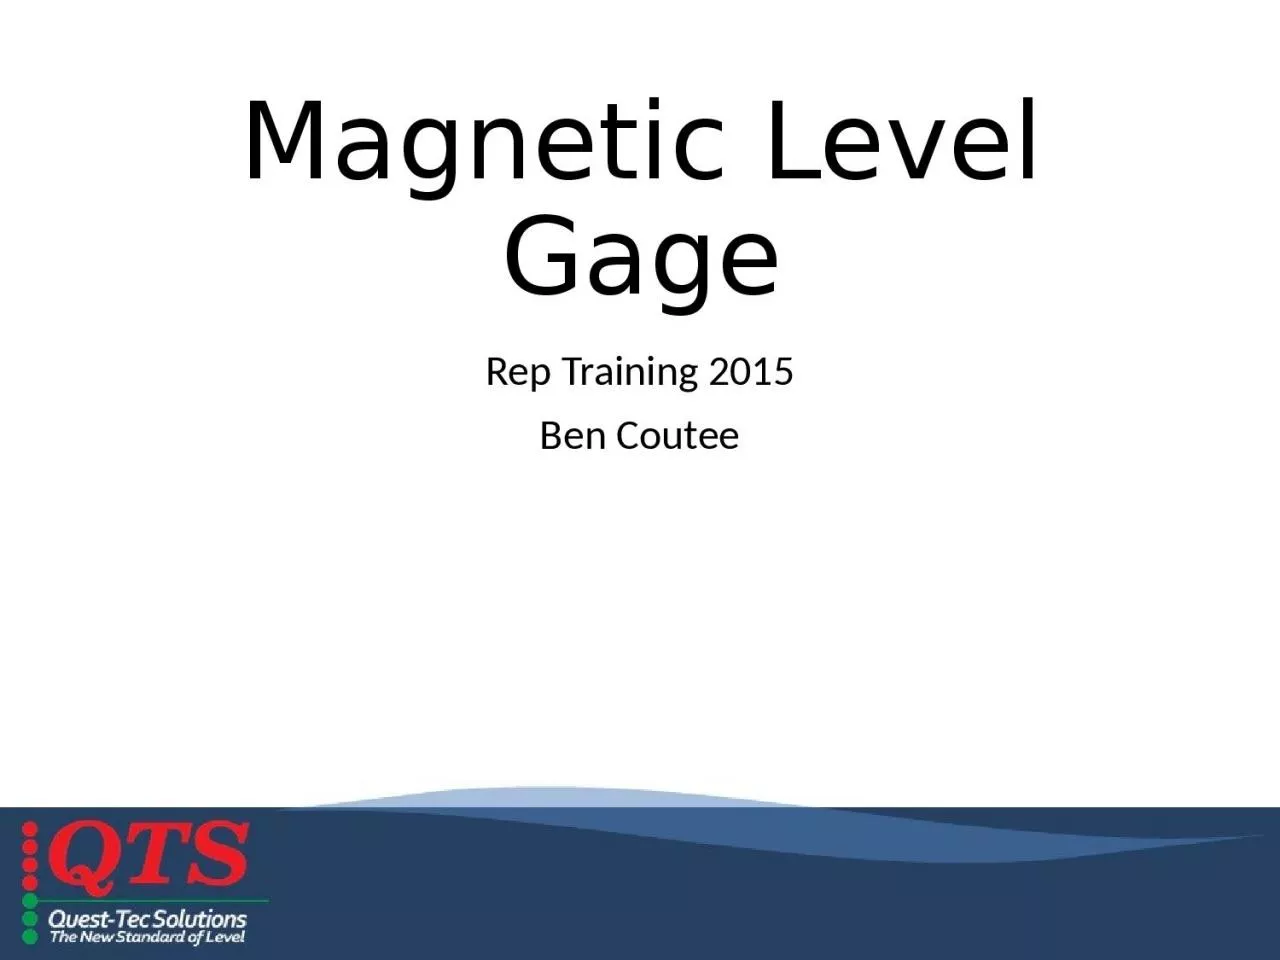 Magnetic Level Gage Rep Training 2015